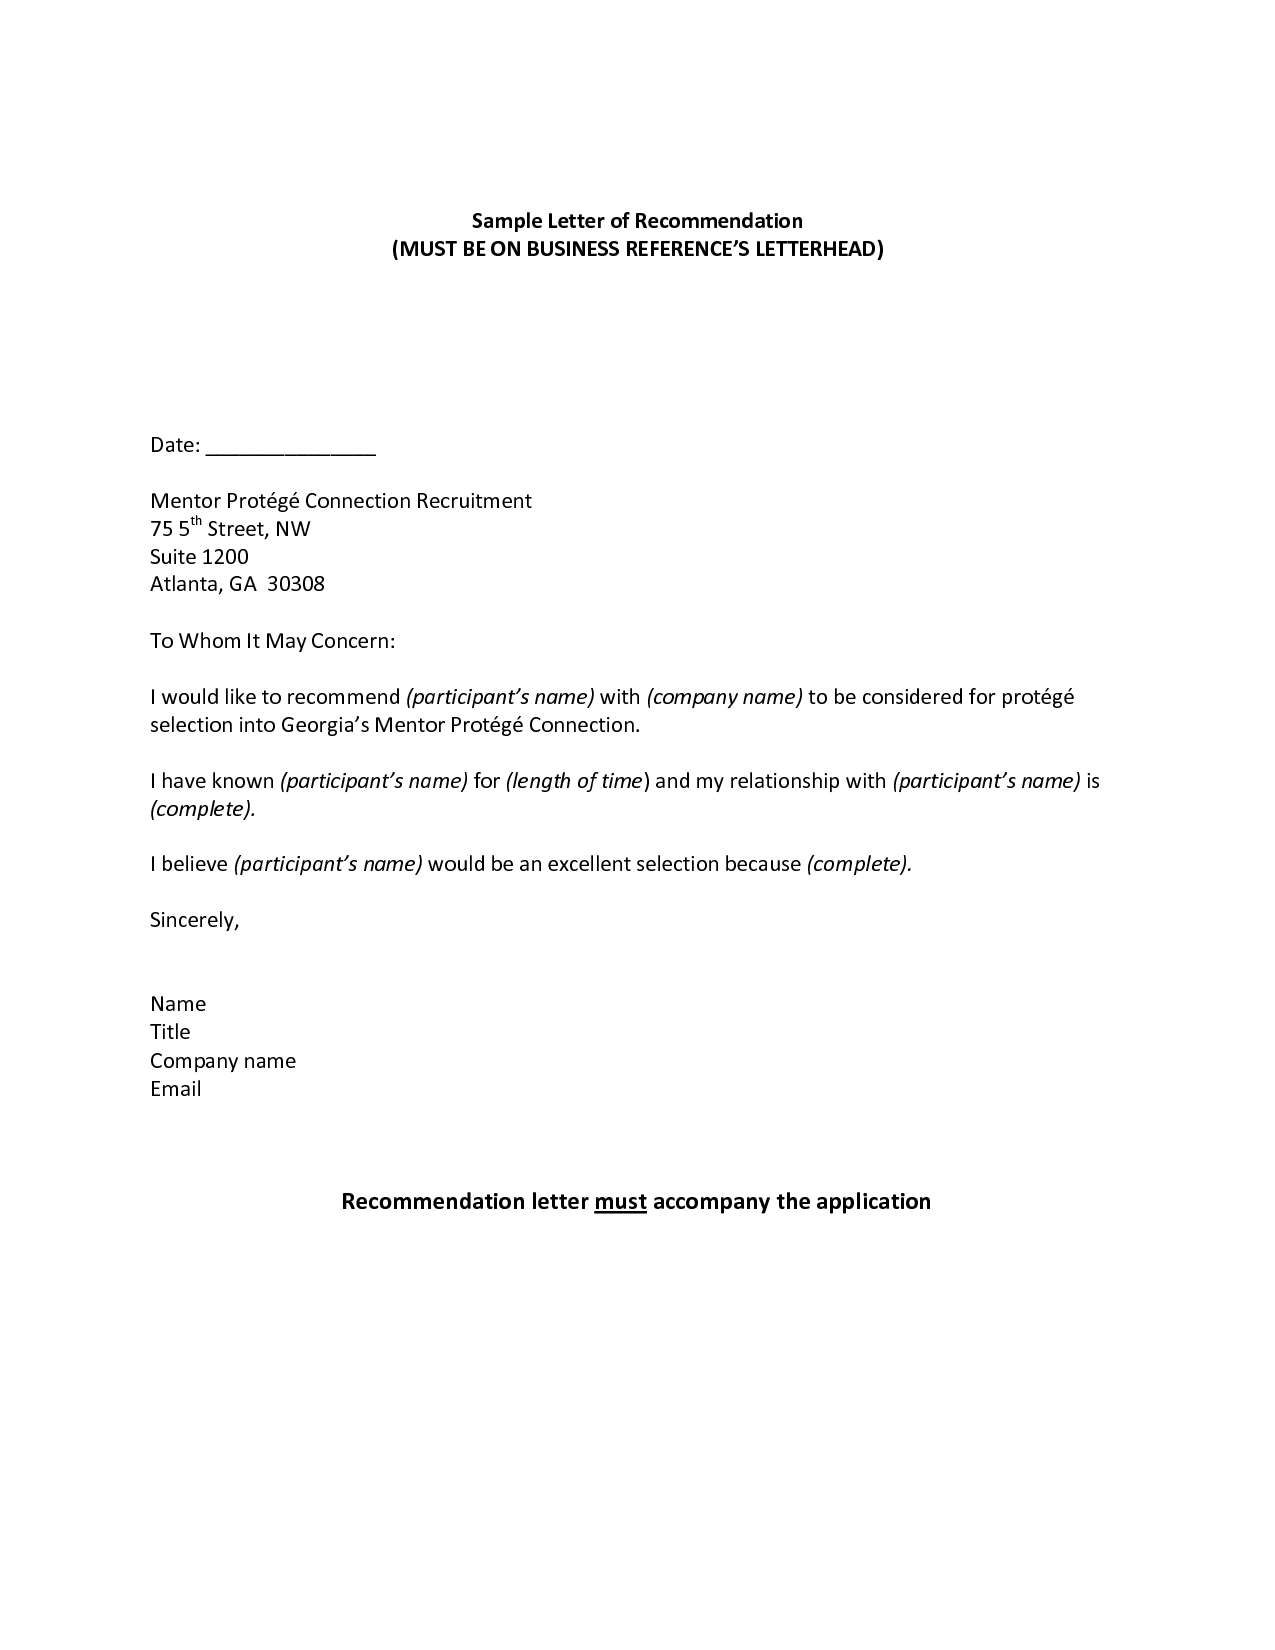 Sample Recommendation Letter For A Company Invazi in sizing 1275 X 1650